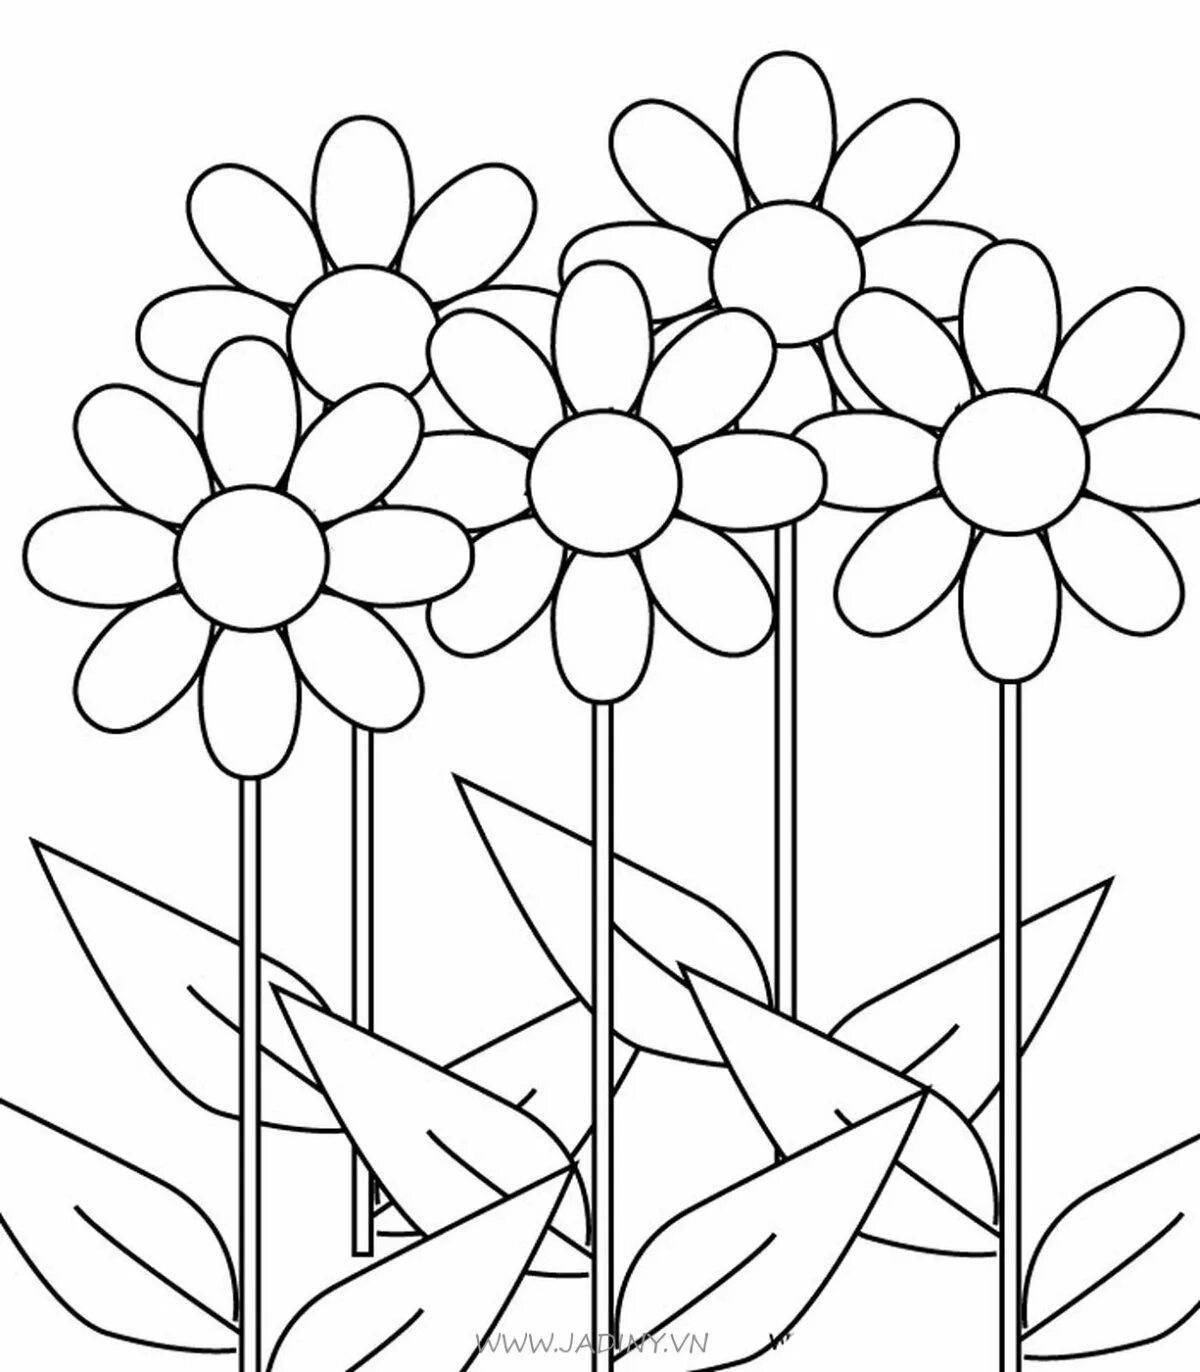 Fun coloring flowers for kids 3 4